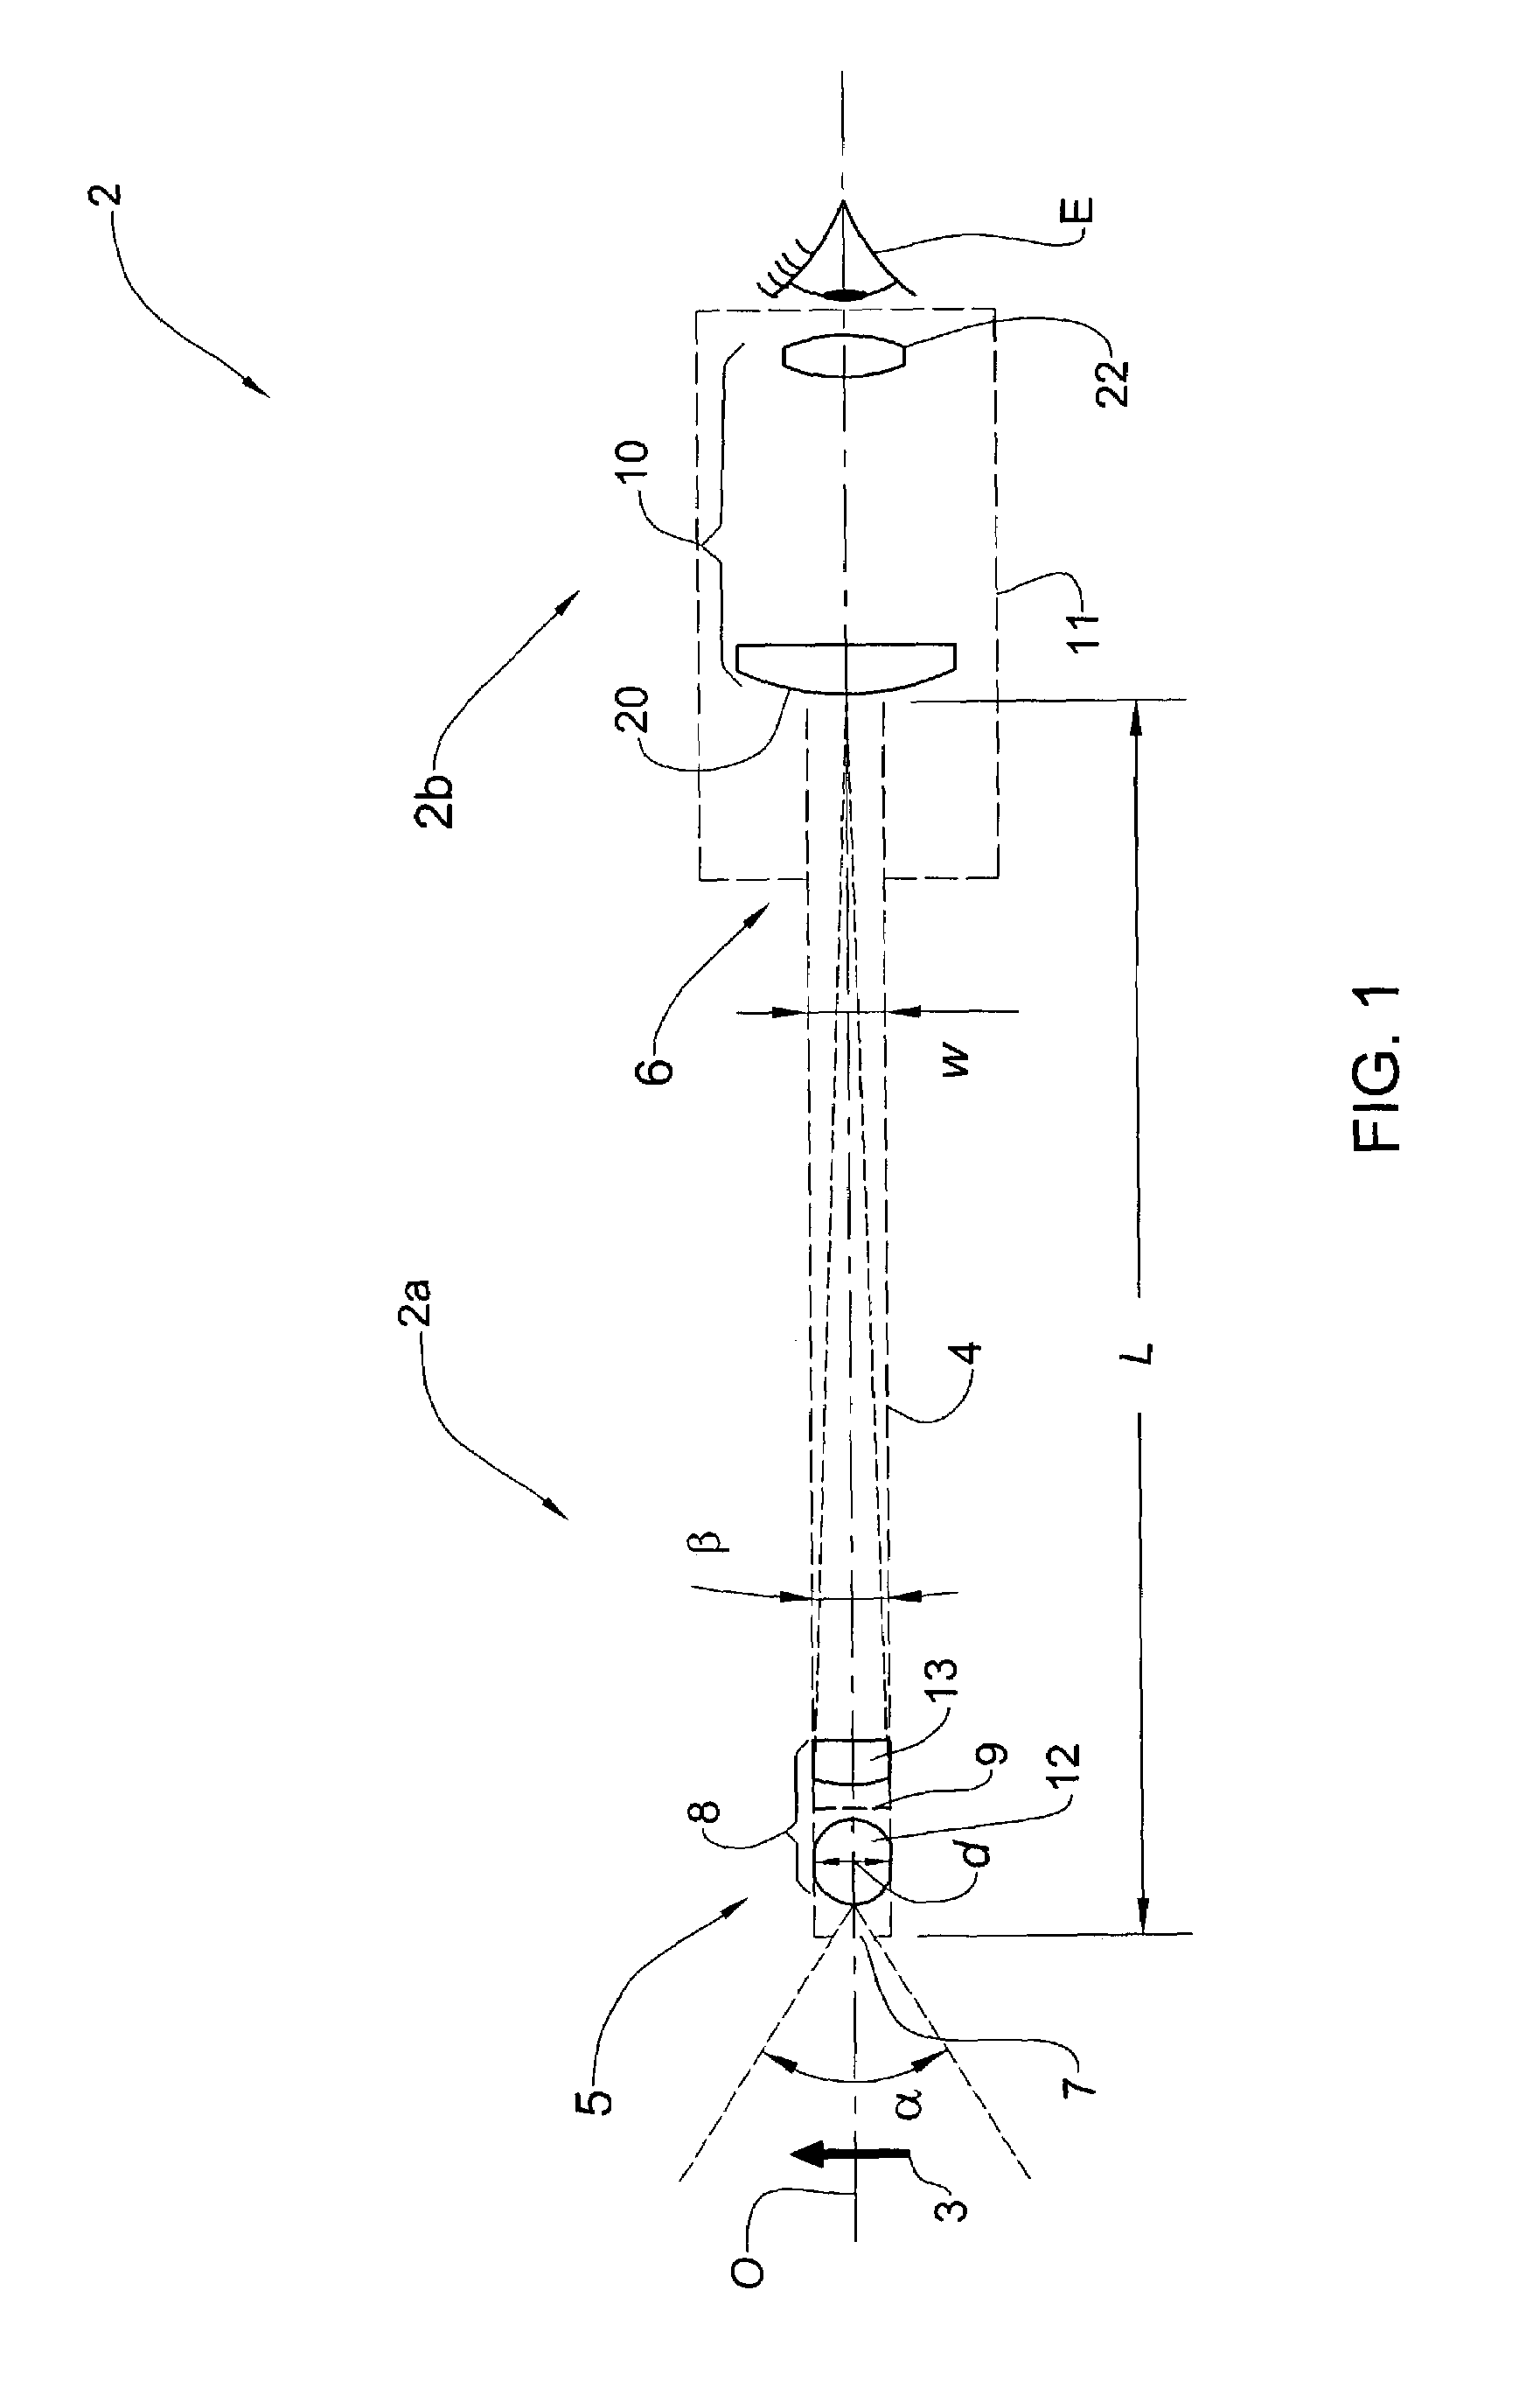 Optical device for viewing of cavernous and/or inaccessible spaces